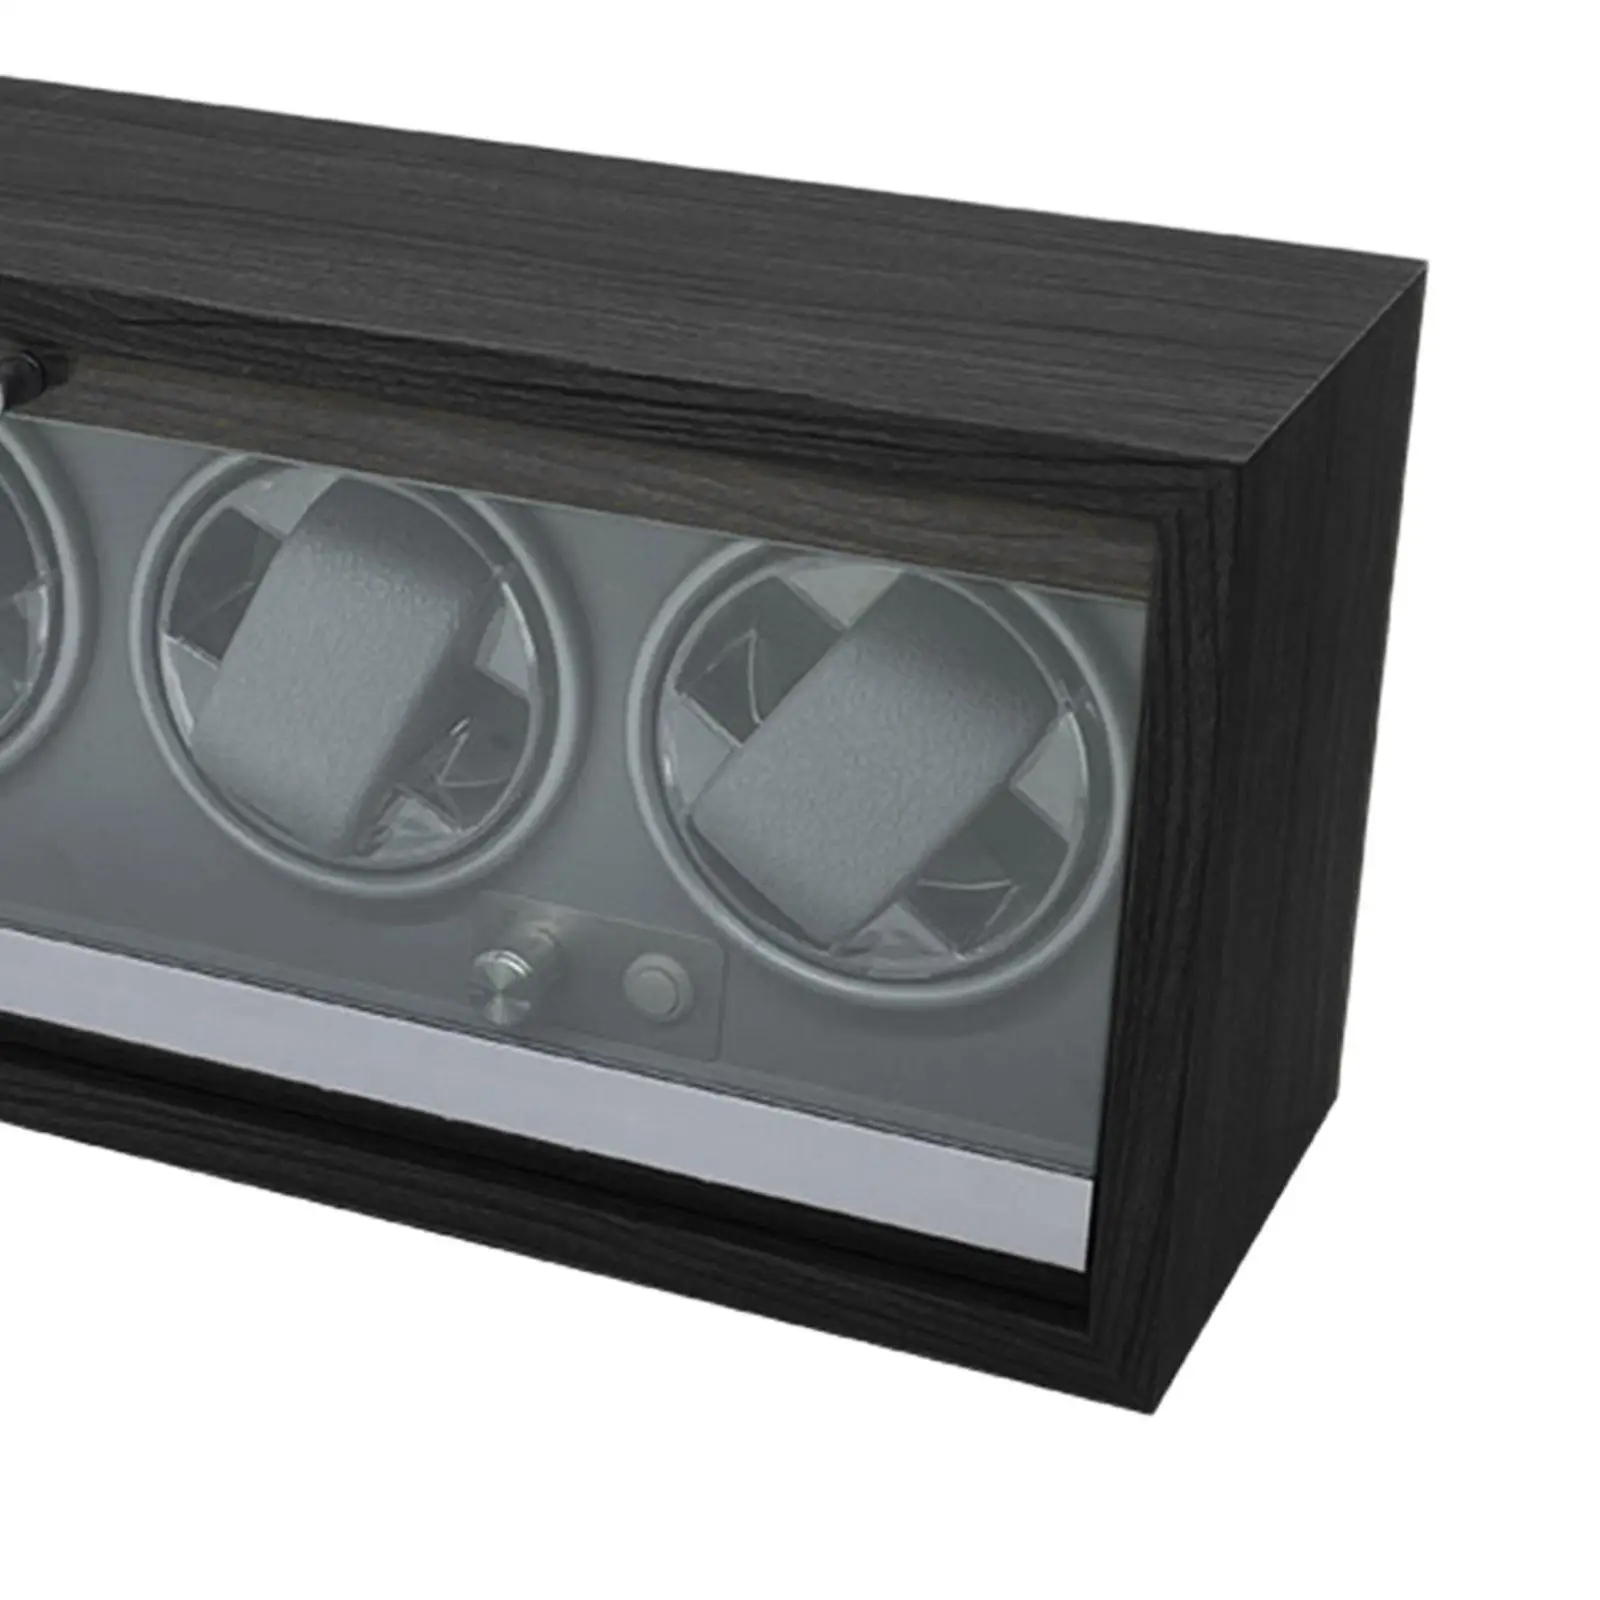 Watch Winder Box 5 Modes Motor with Ambient Light 4 Slots Electric Motor Boxes Winding Watches Shaker for Mechanical Watches